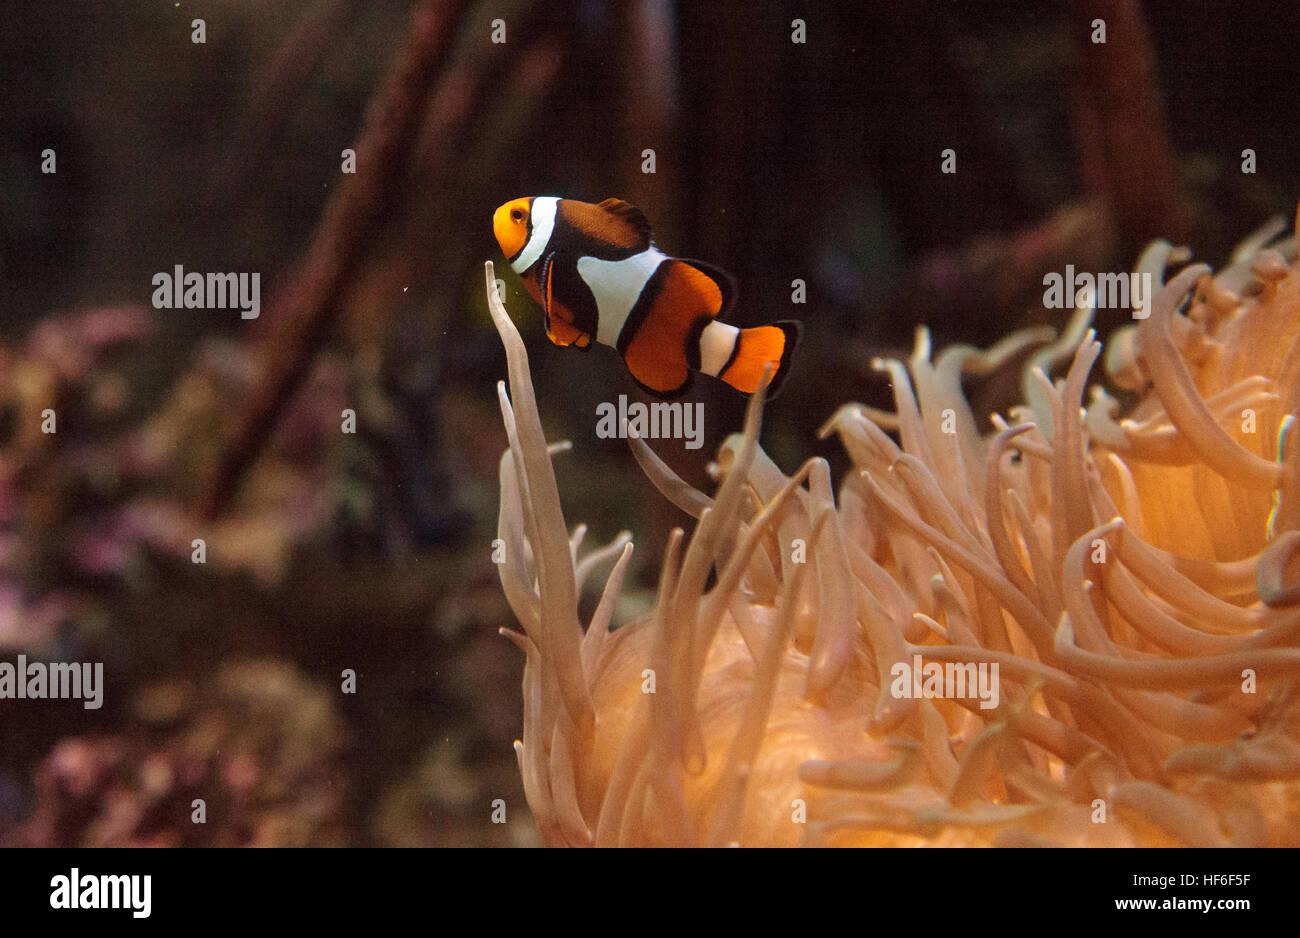 Clownfish, Amphiprioninae, in a marine fish and reef aquarium, staying close to its host anemone Stock Photo